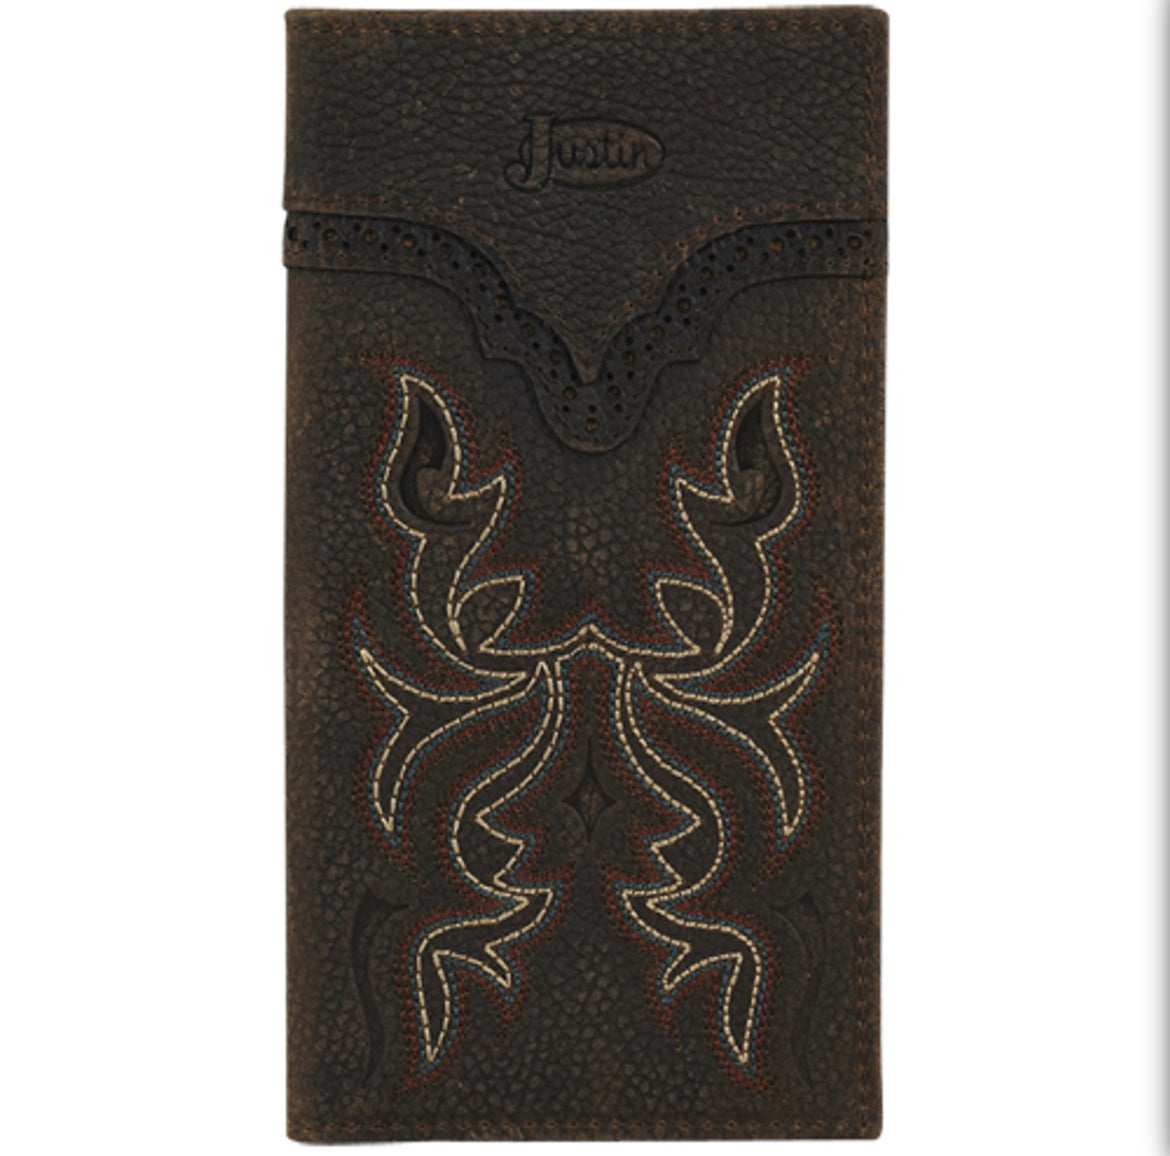 Justin Rodeo Boot Stitch Wallet